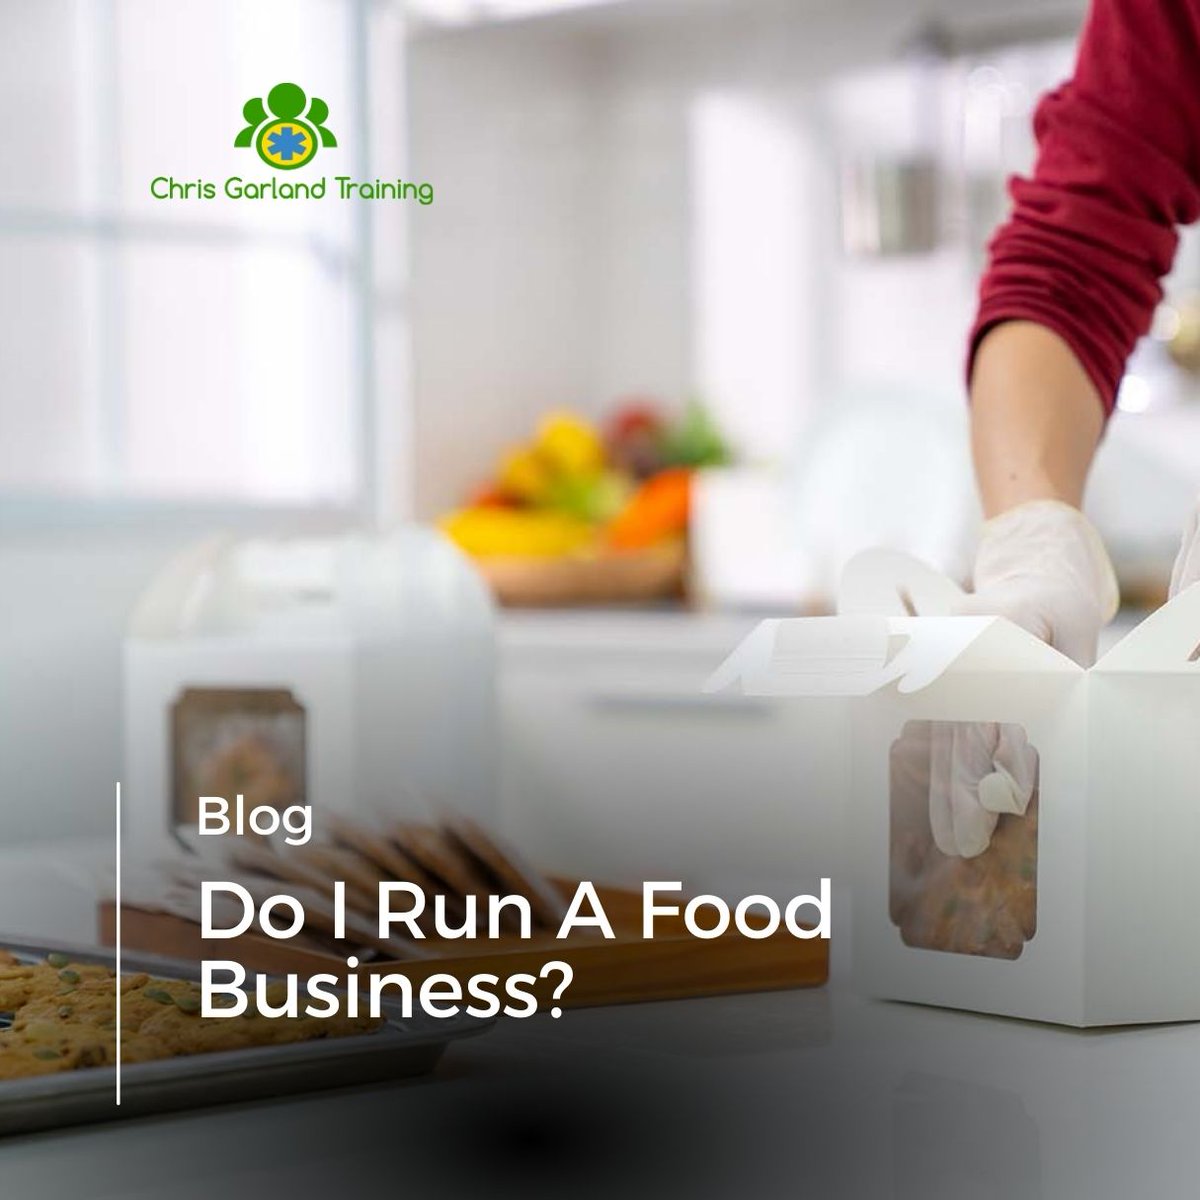 It’s imperative for aspiring and existing food operators to understand the legal framework surrounding food businesses in the UK. Our article aims to demystify what constitutes a food business, the legal requirements and the necessity of registering. chrisgarlandtraining.co.uk/do-i-run-a-foo…